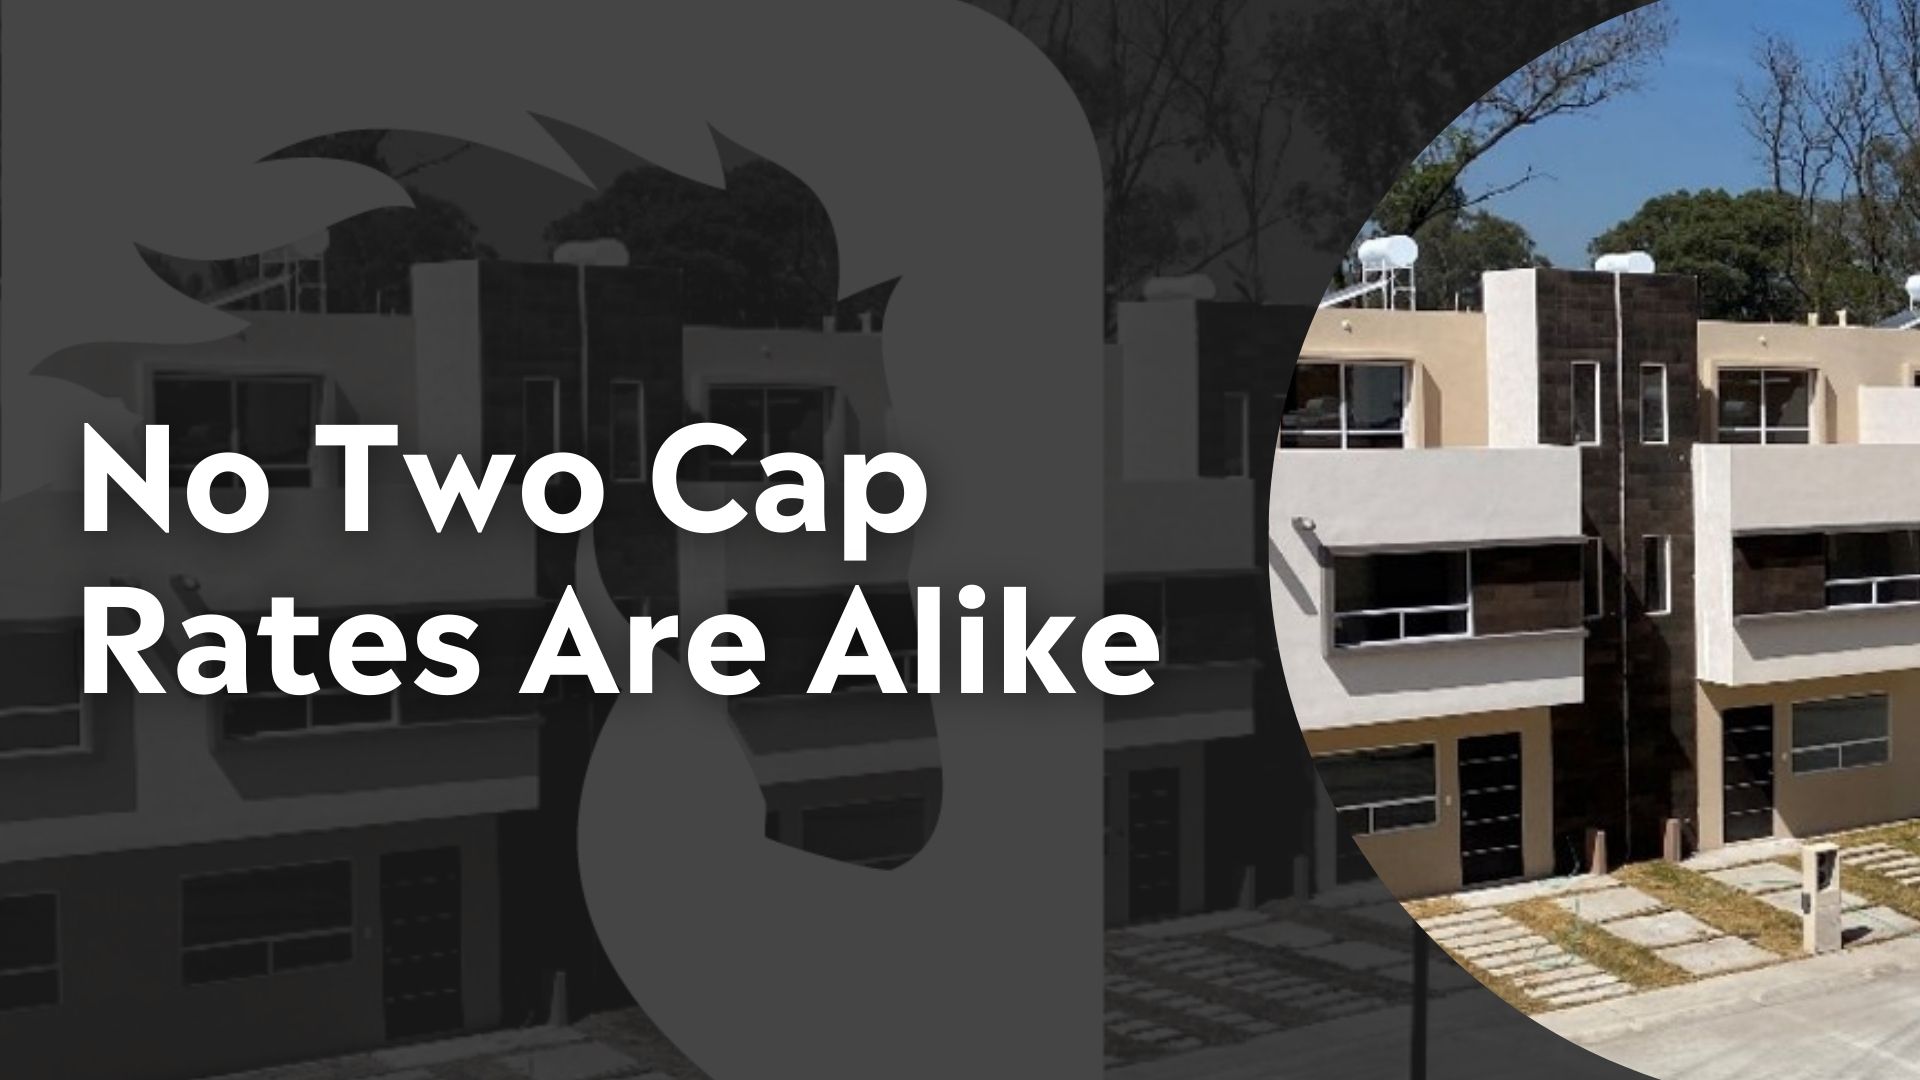 FI [Web] - No Two Cap Rates Are Alike